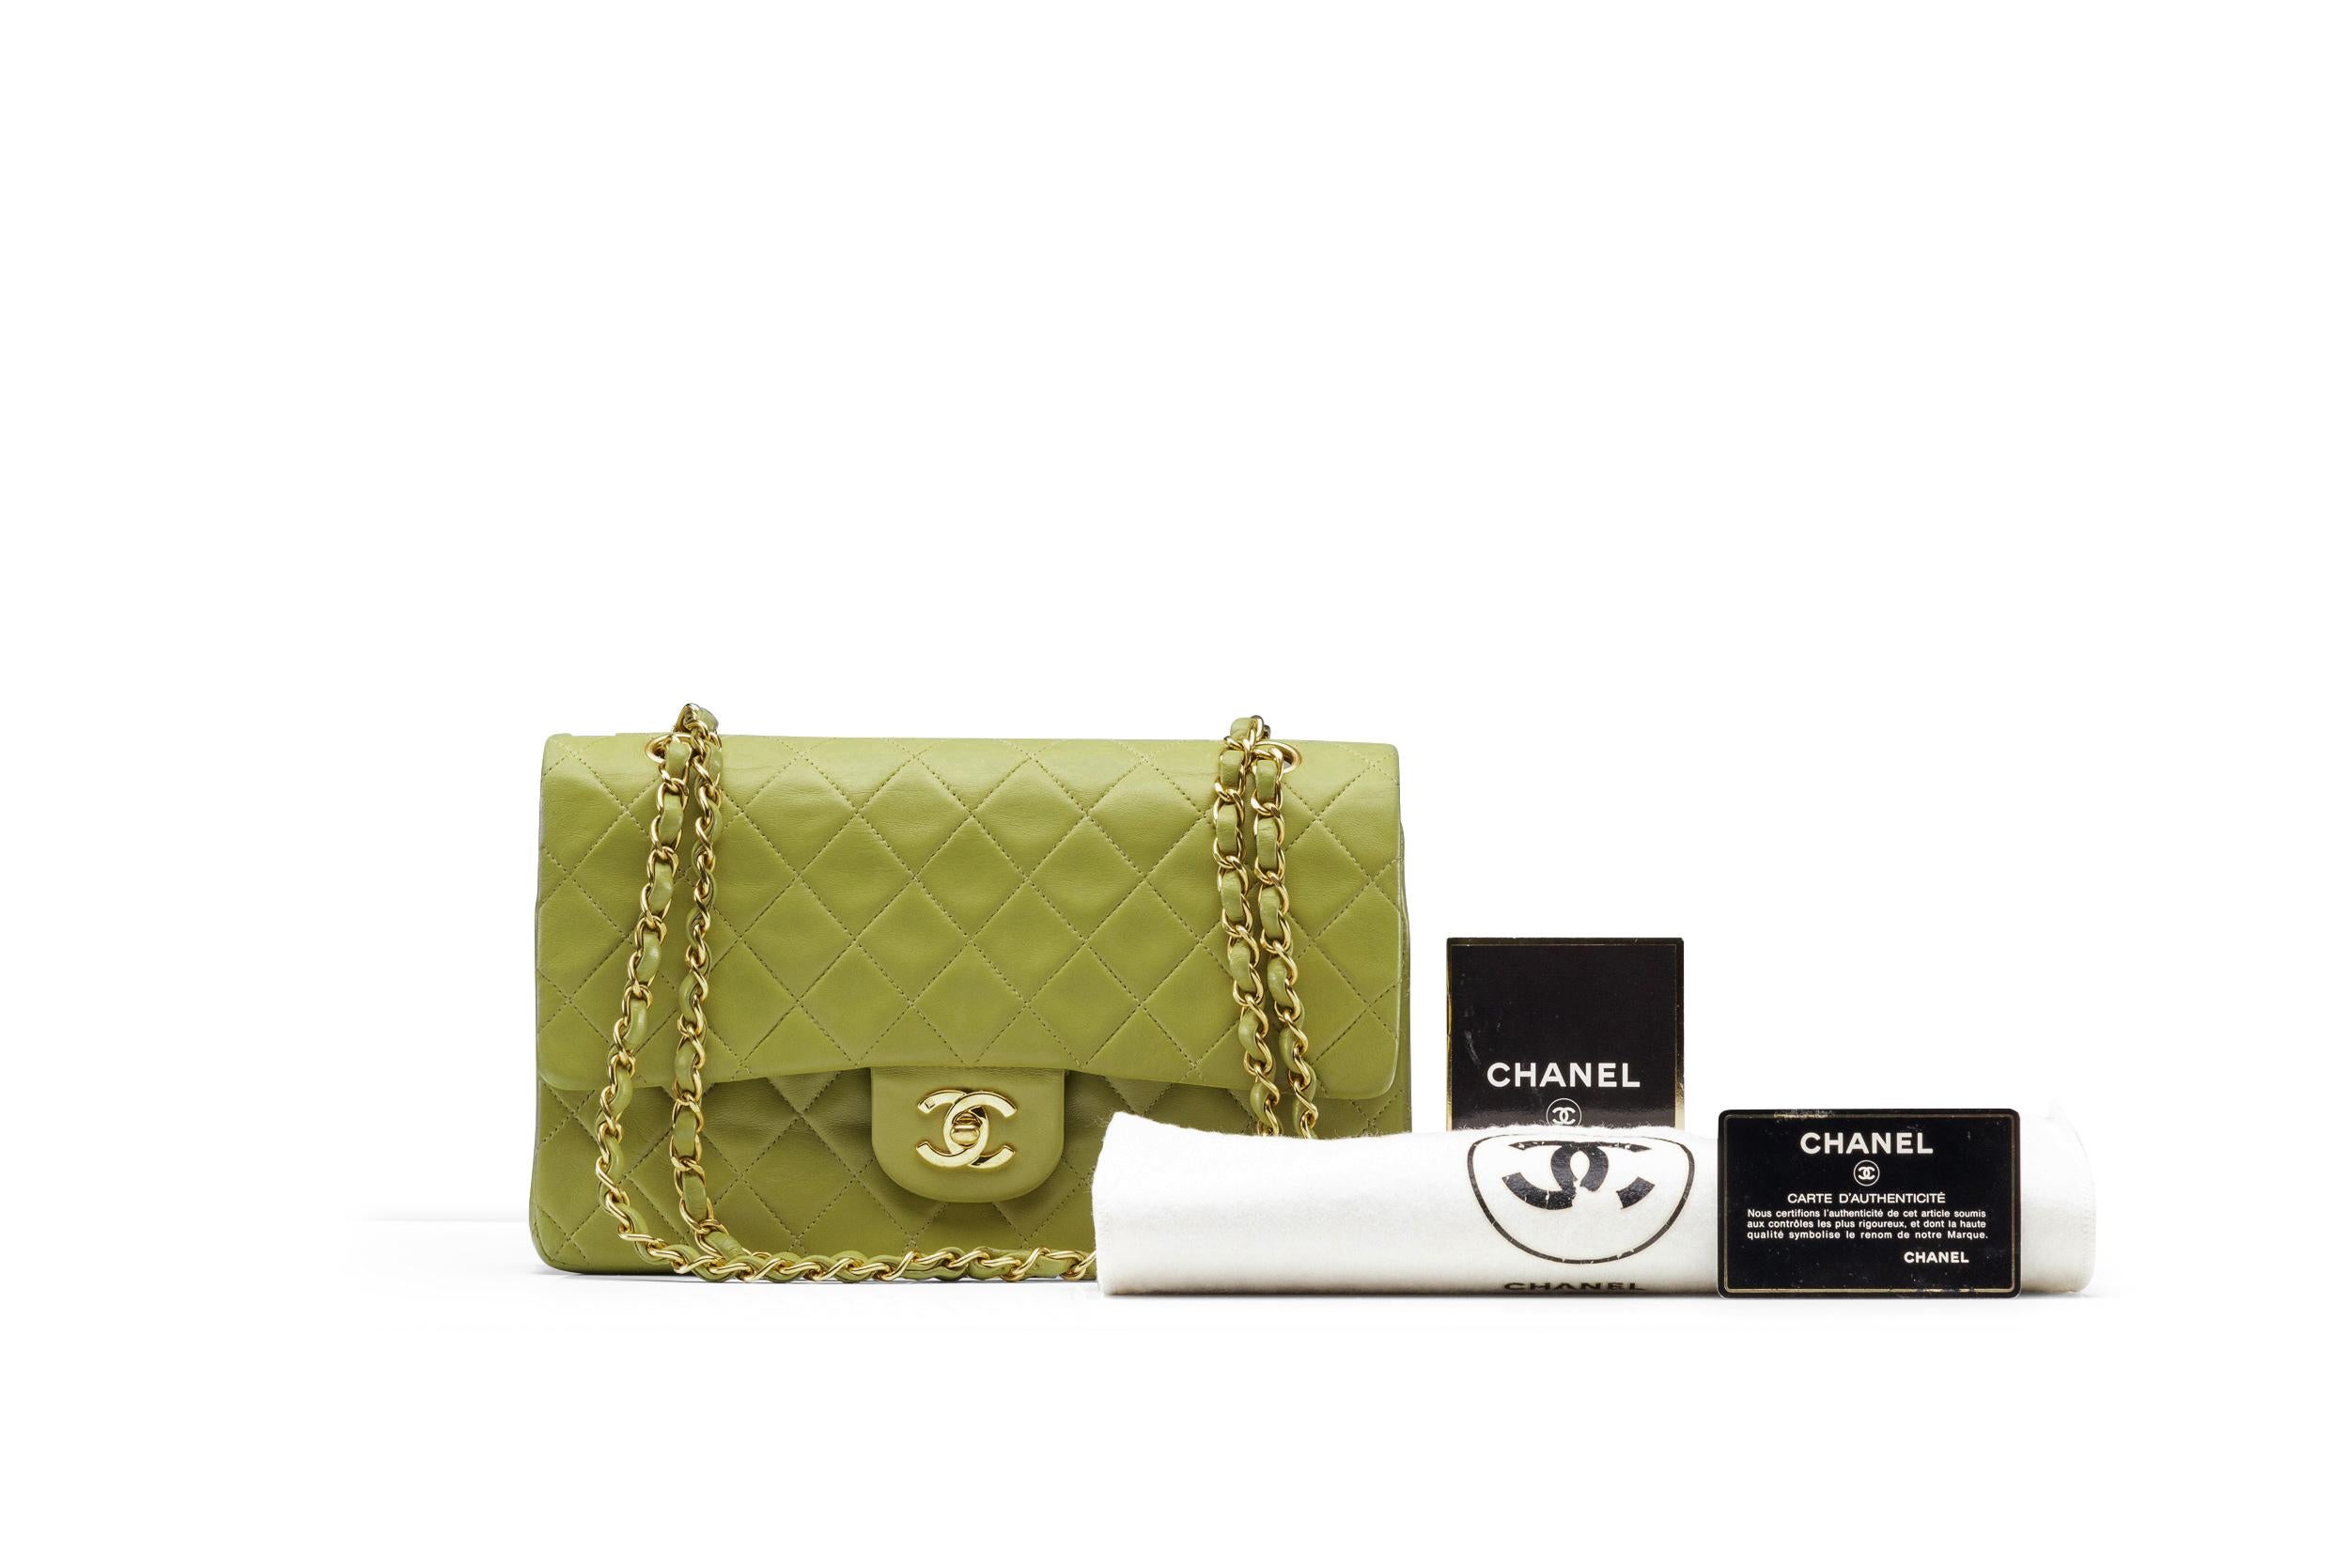 From the collection of SAVINETI we offer this Chanel Classic Flap Medium:
-    Brand: Chanel
-    Model: Classic Flap Medium
-    Color: Lime (super rare)
-    Year: 1994-1996
-    Condition: Very Good Condition
-    Materials: Lambskin leather, 24k